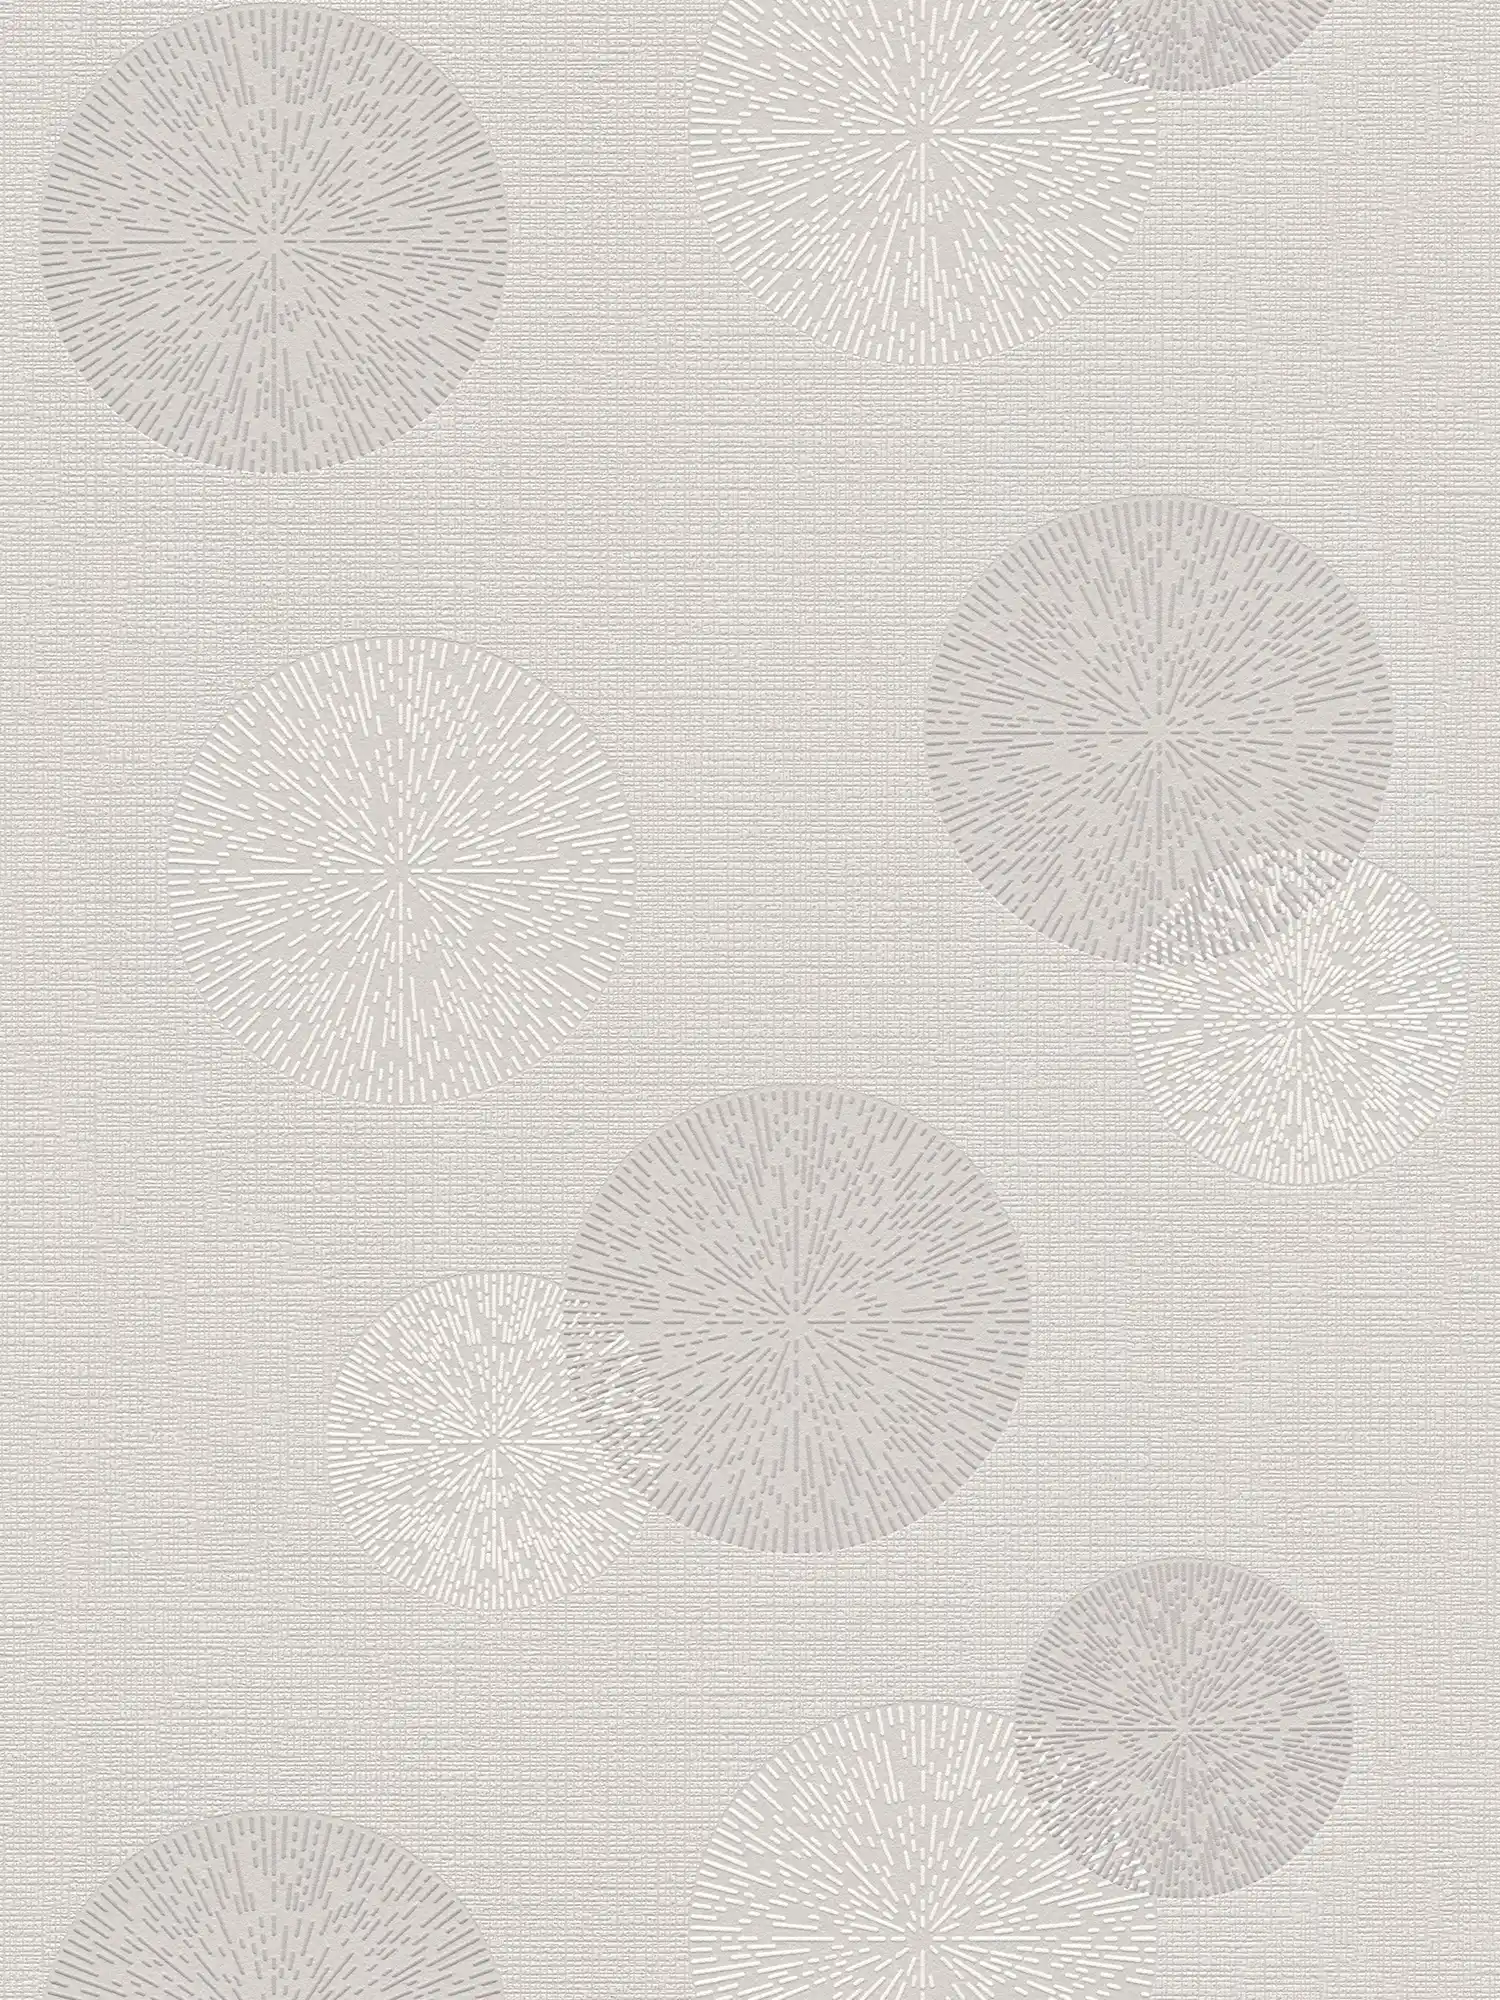 Textured wallpaper with retro pattern 50s vintage look - grey
